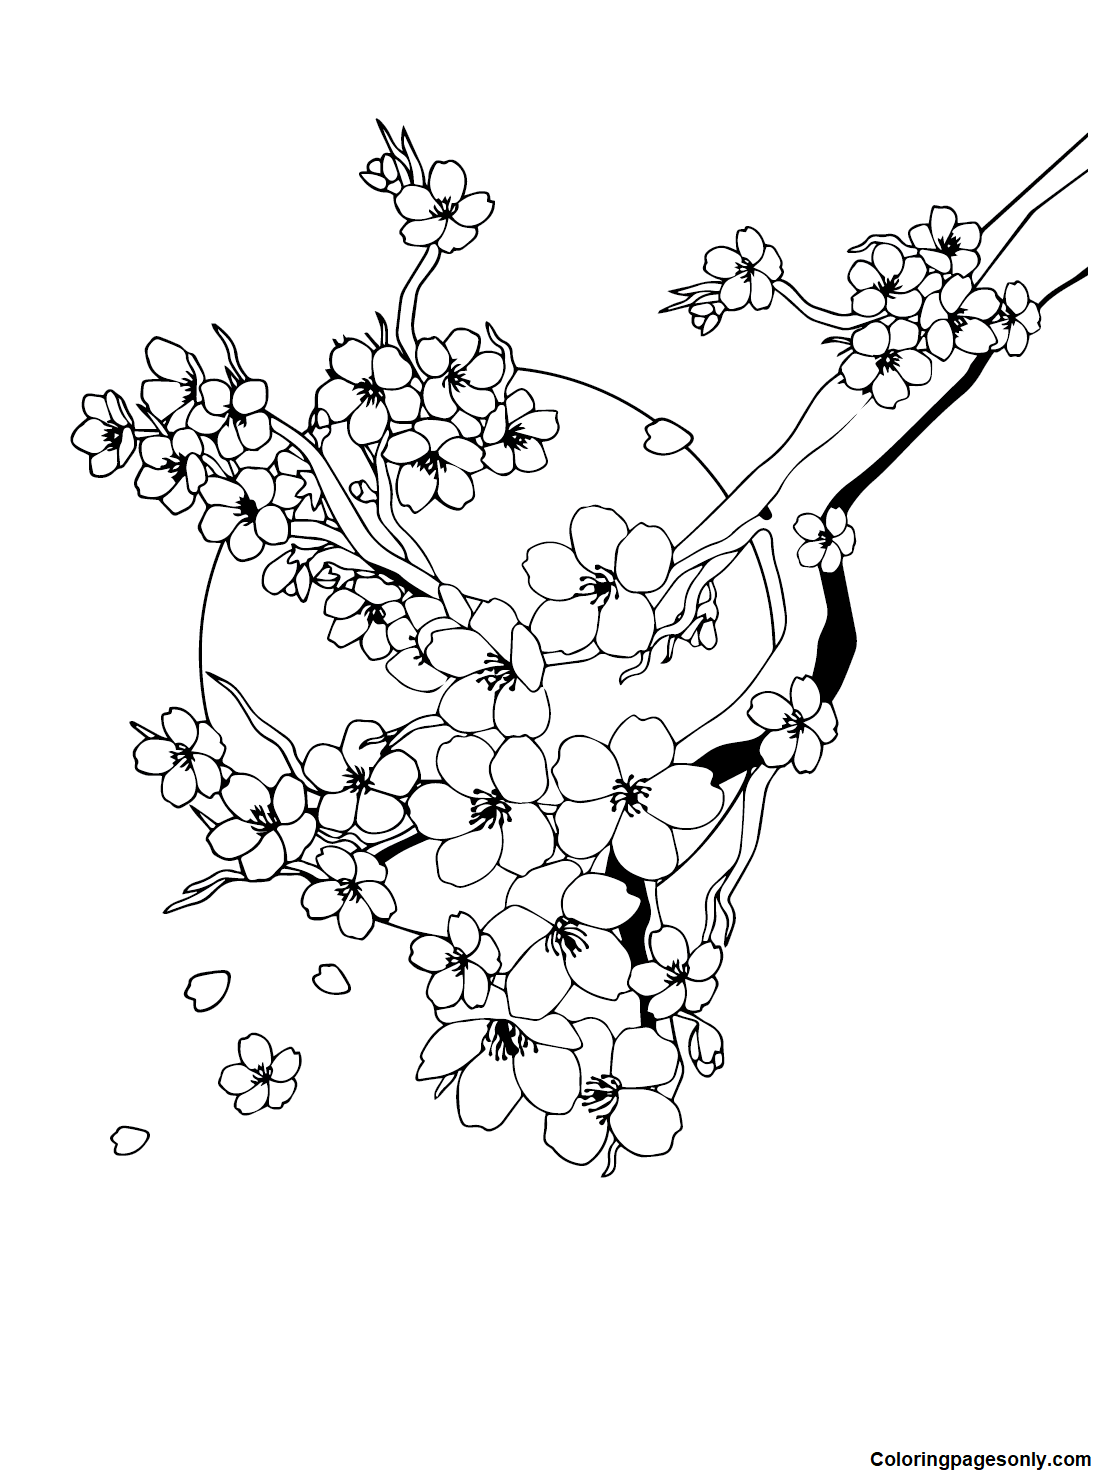 Cherry Blossom Free Coloring Pages